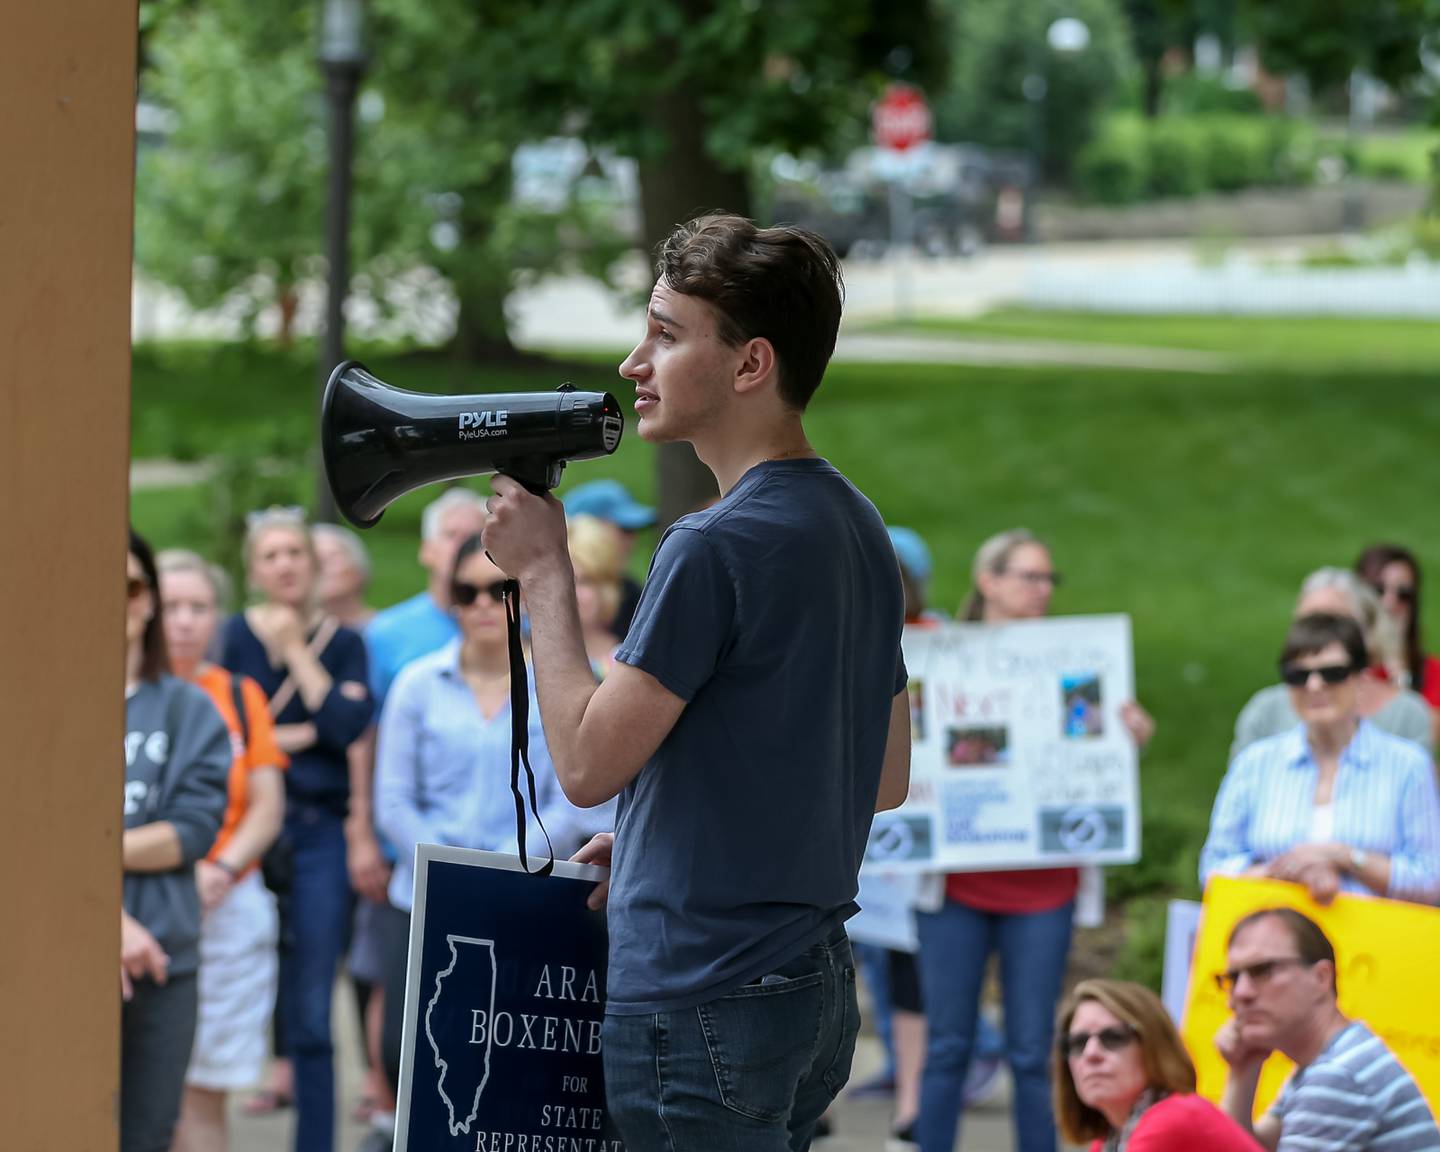 State representative candidate addresses the crowd during the March for Lives rally and march. June 11, 2022